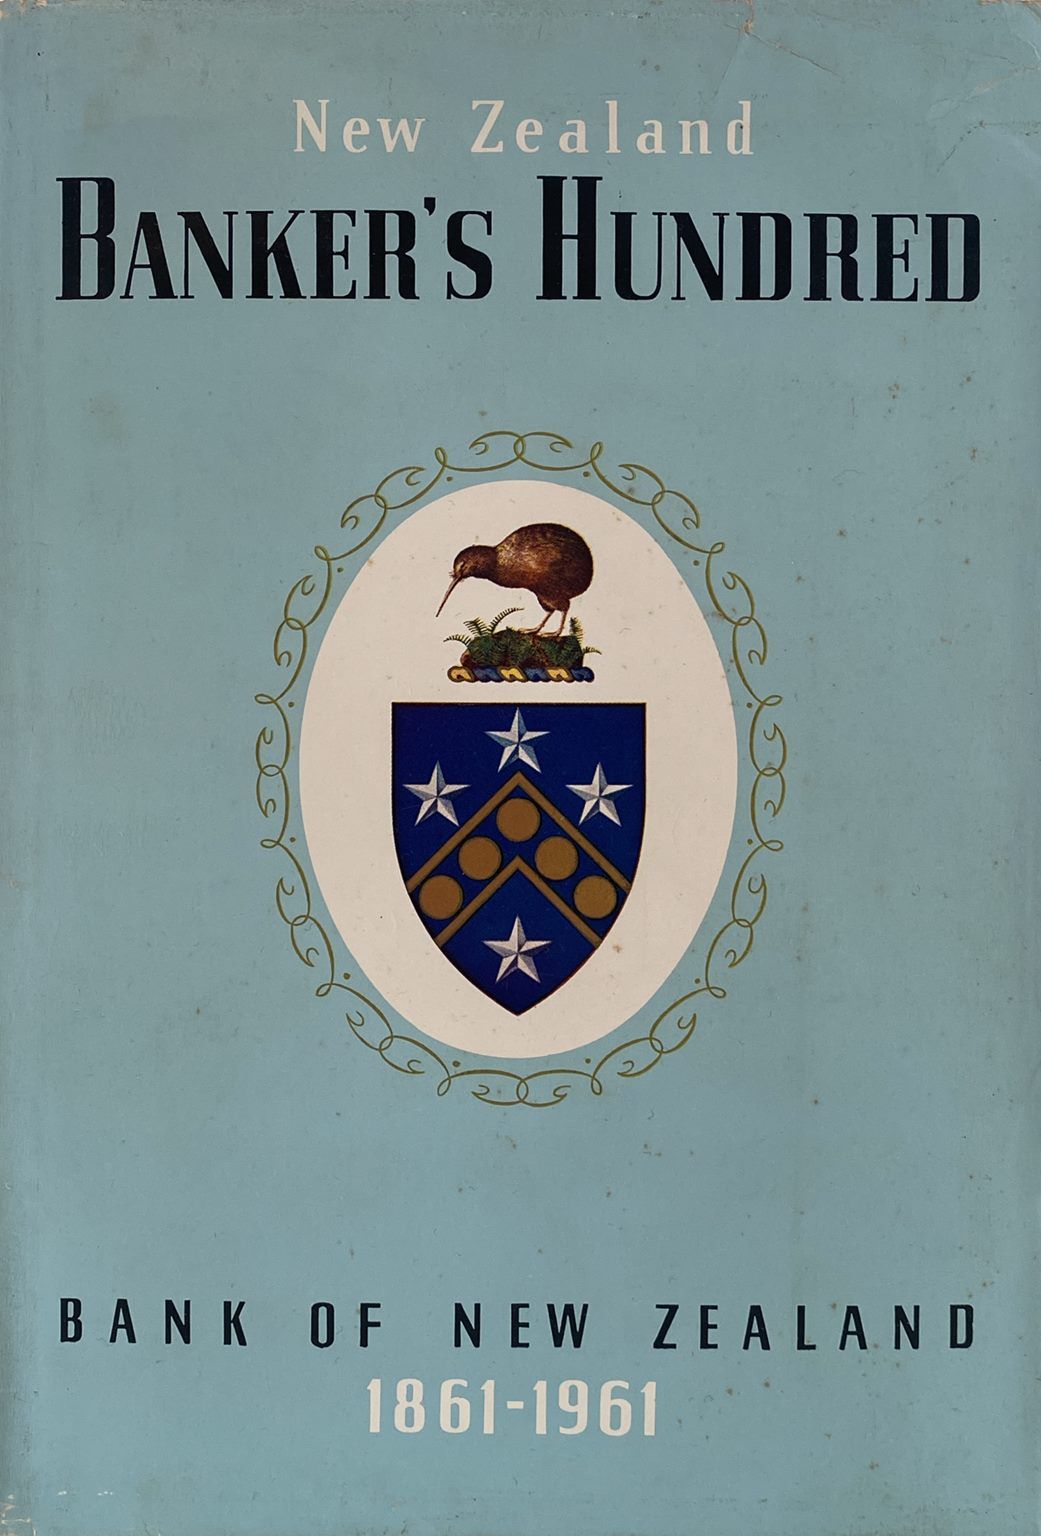 BANKERS HUNDRED: History of Bank of New Zealand 1861 - 1961